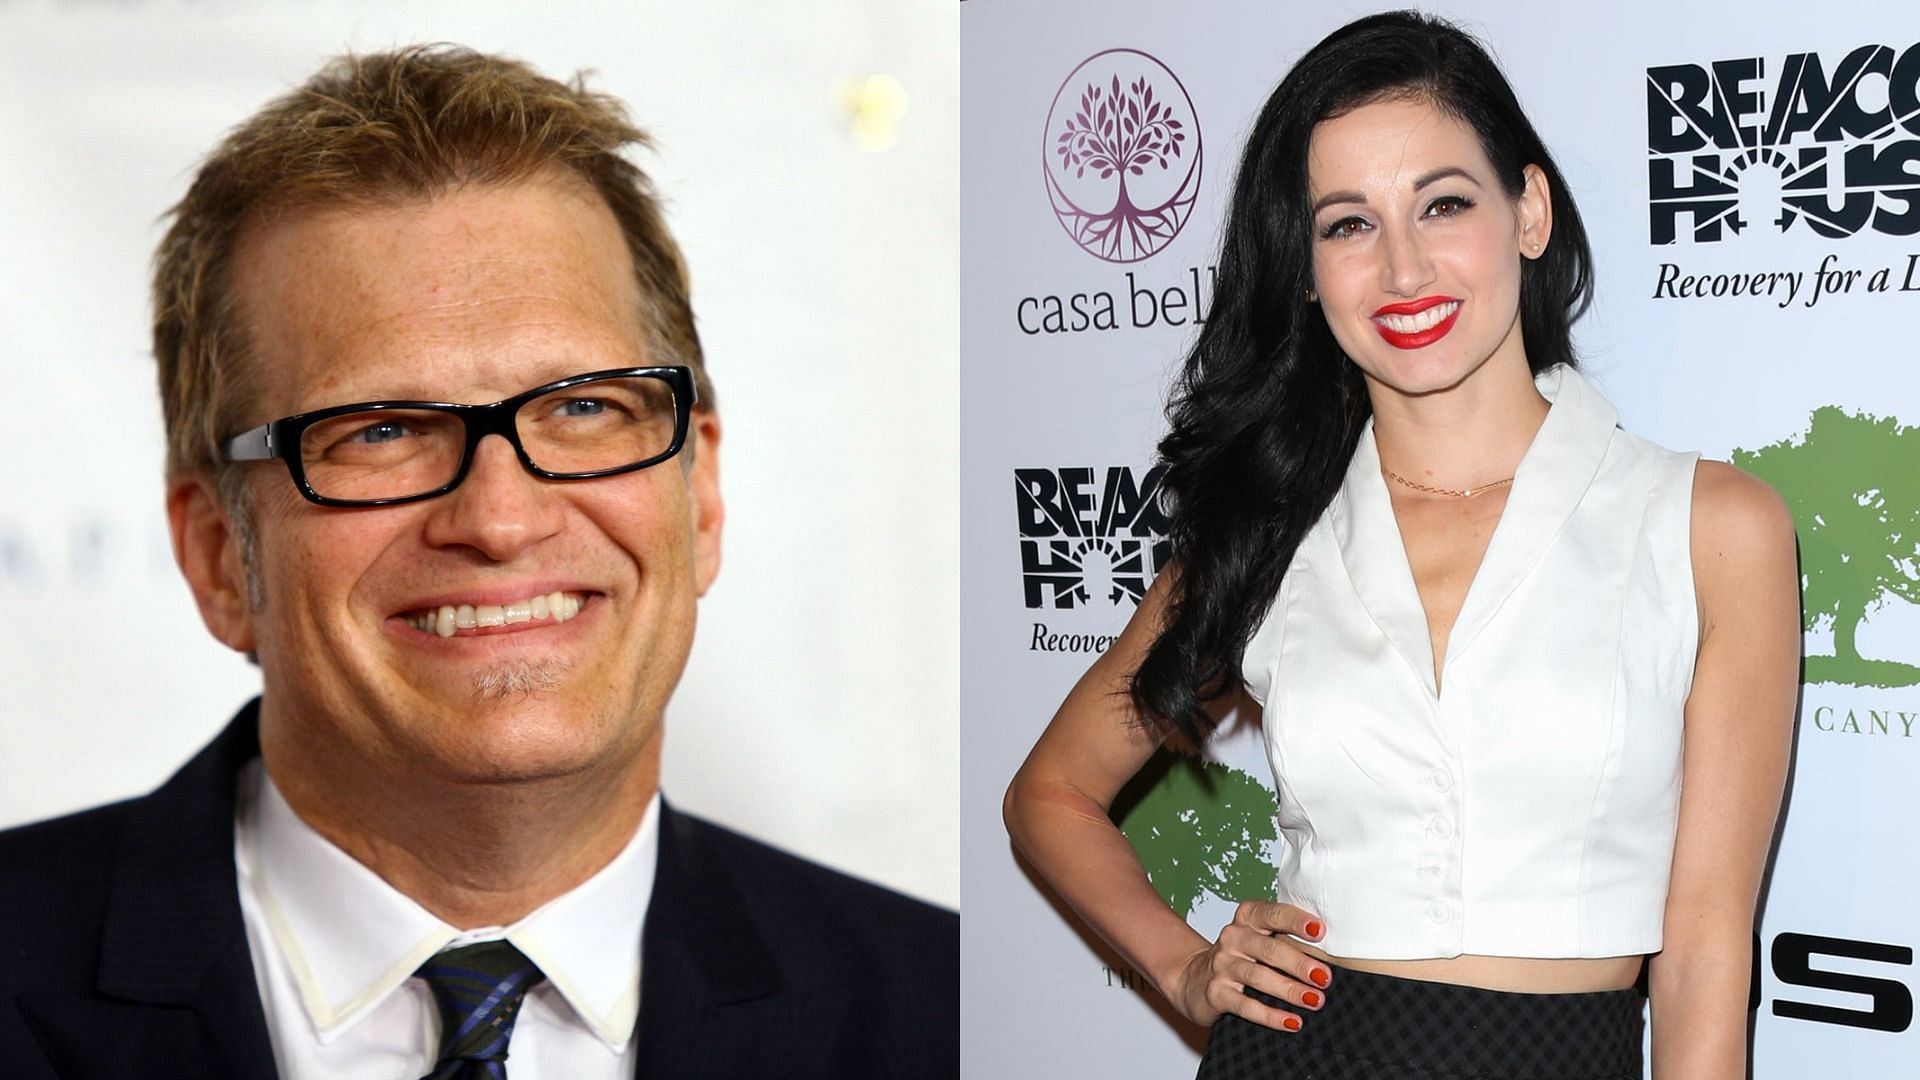 Drew Carey said he can not celebrate Valentine&#039;s day like before since his ex-fiancee died four years ago on February 15 (Image via Getty Images/ Paul Archuleta/ Neilson Barnard)